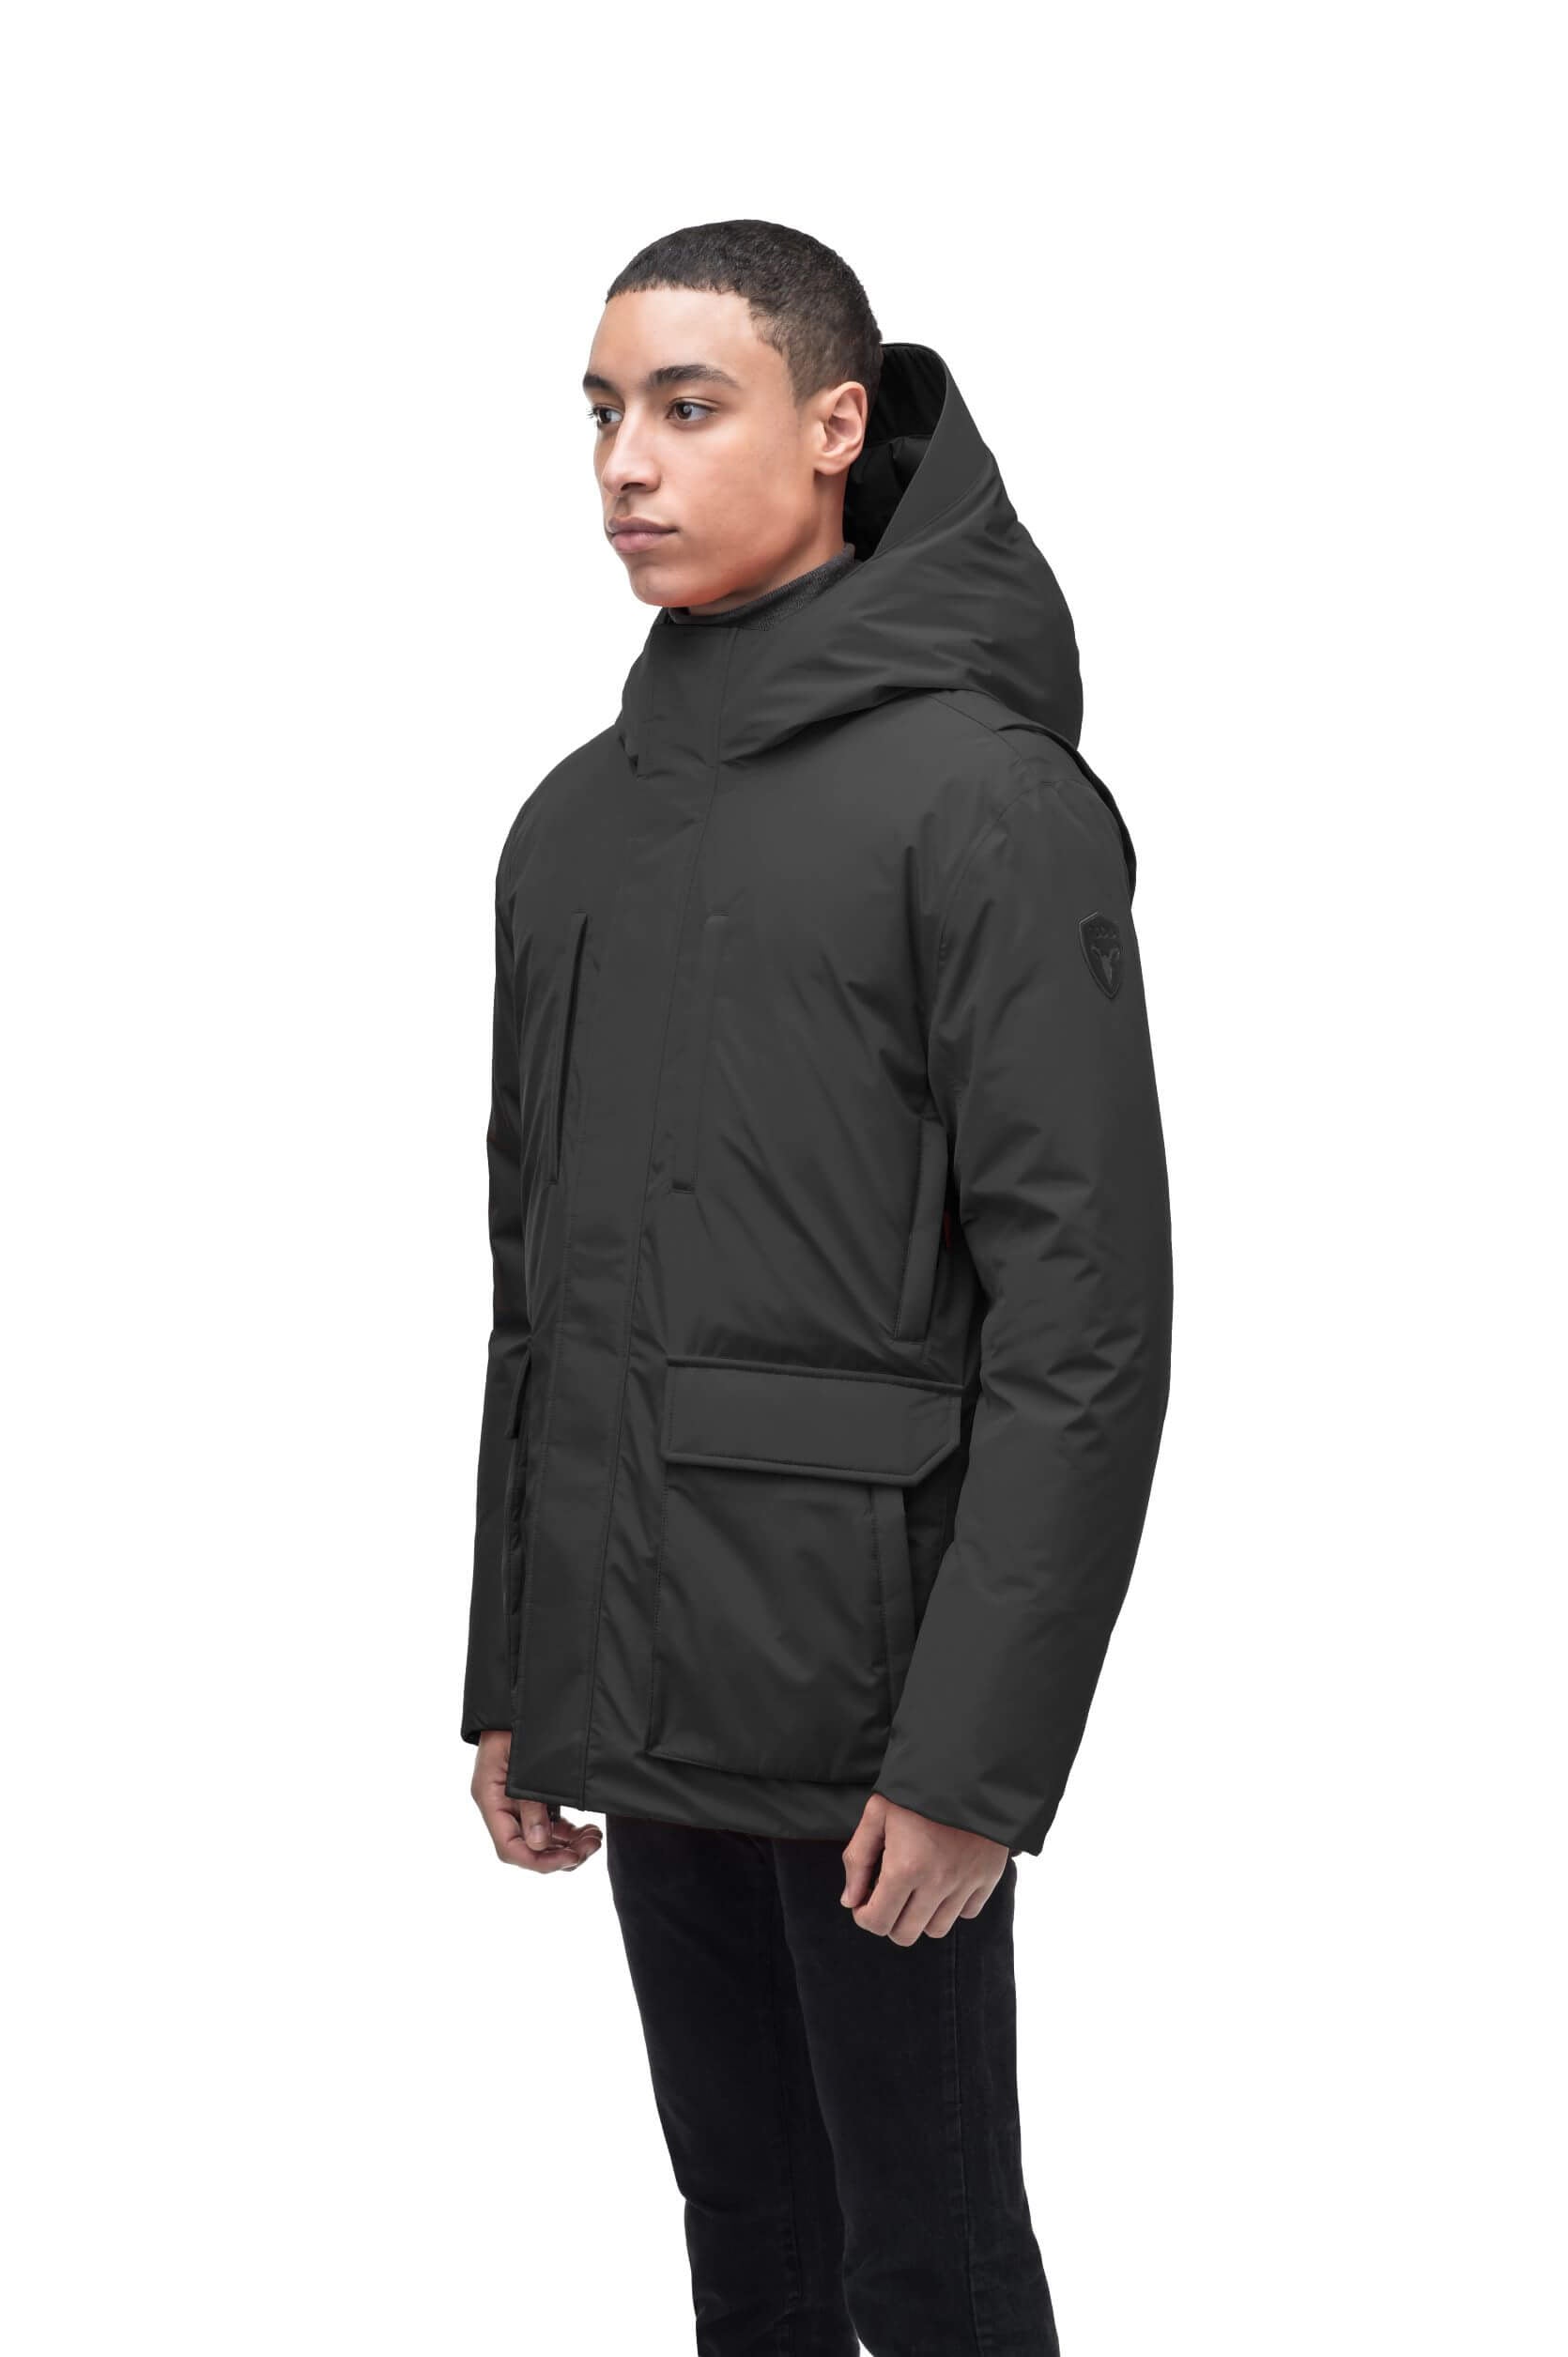 Geo Men's Short Parka in hip length, Canadian duck down insulation, non-removable hood, and two-way zipper, in Black